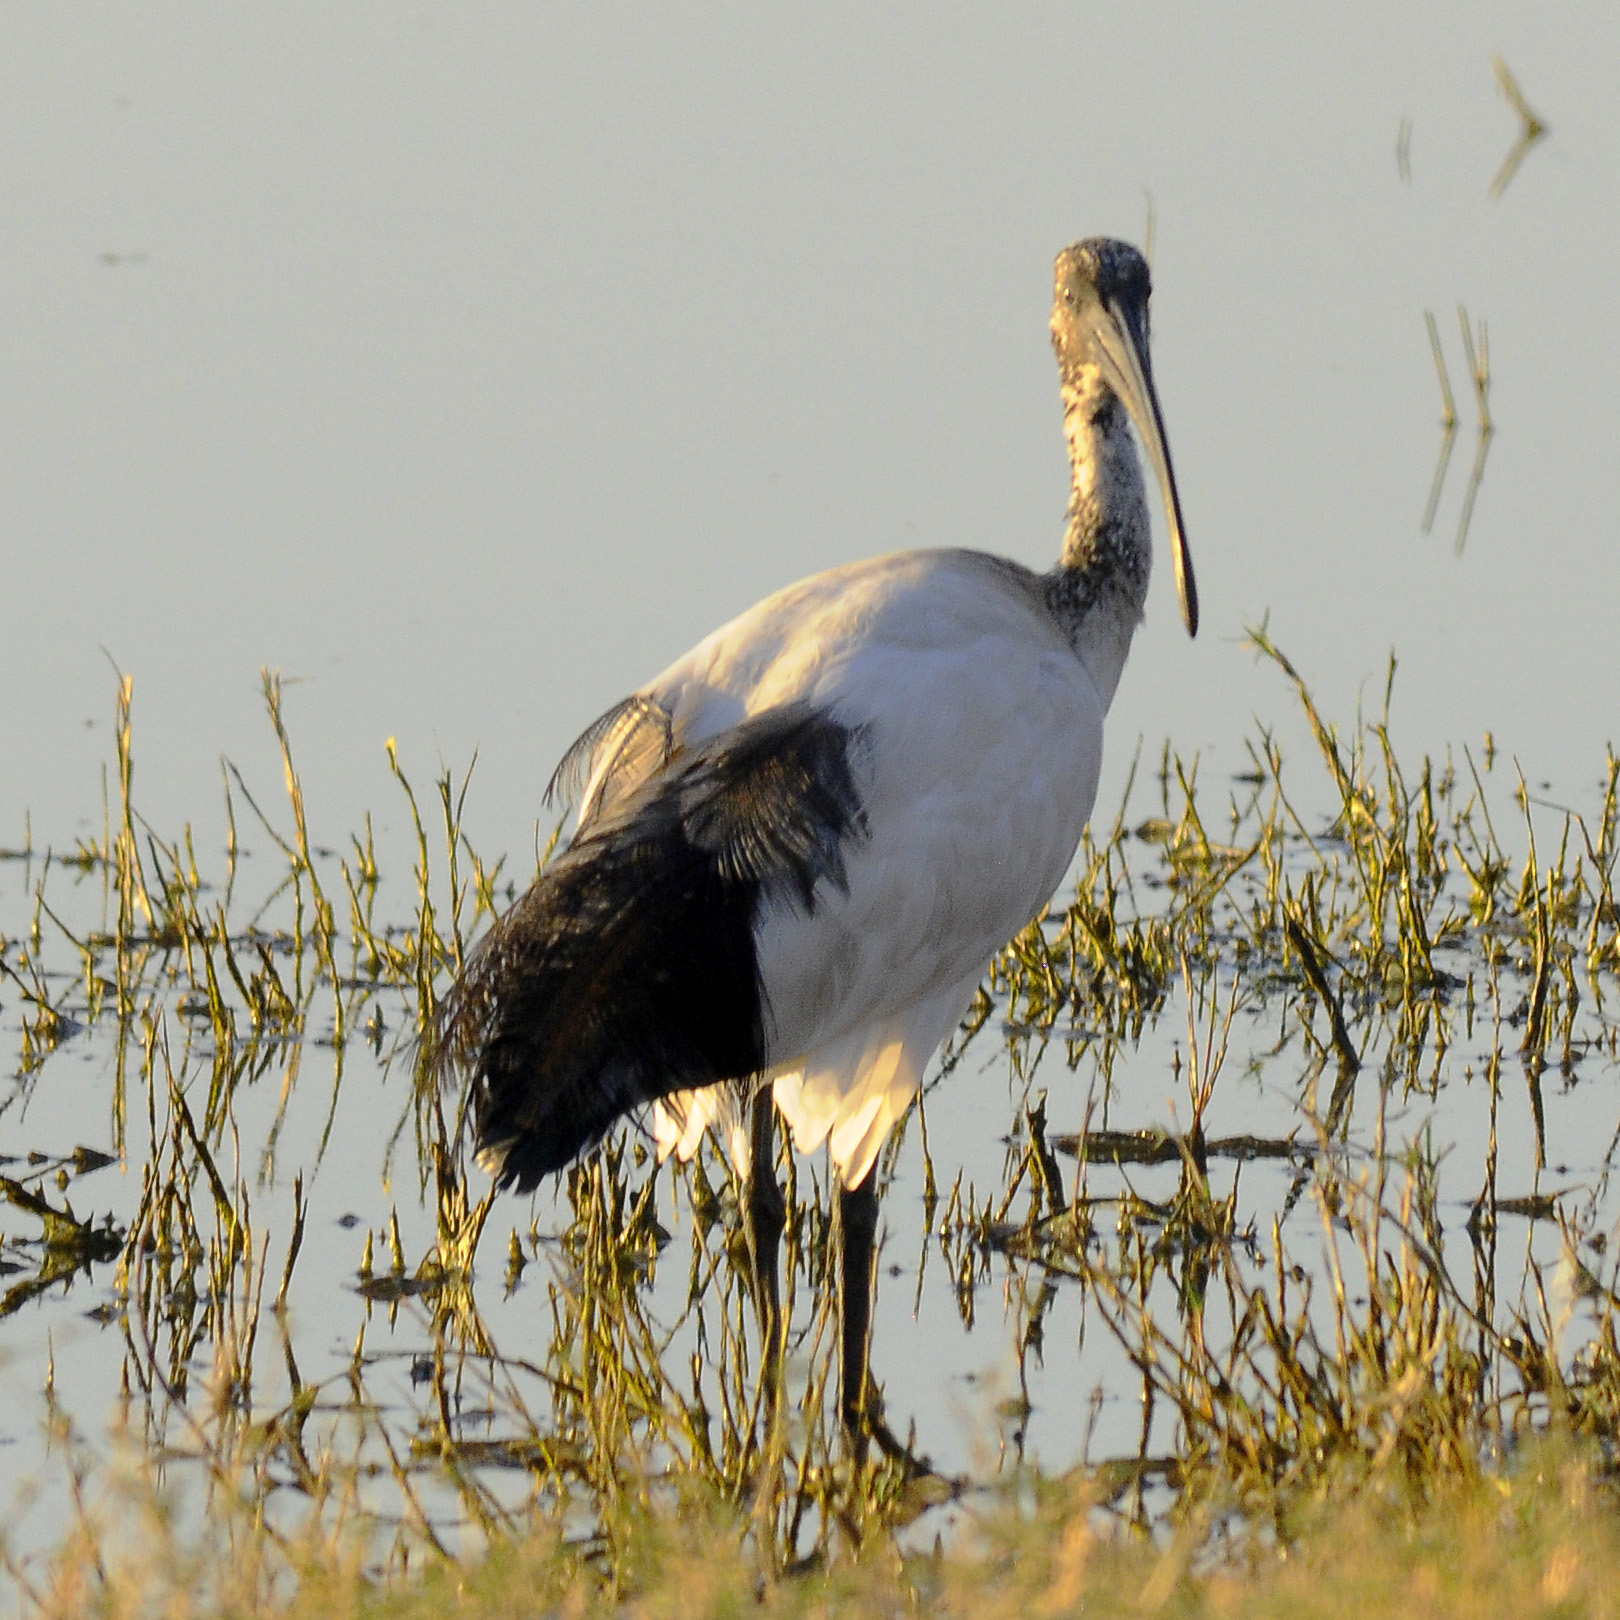 a black and white bird standing in a marsh area